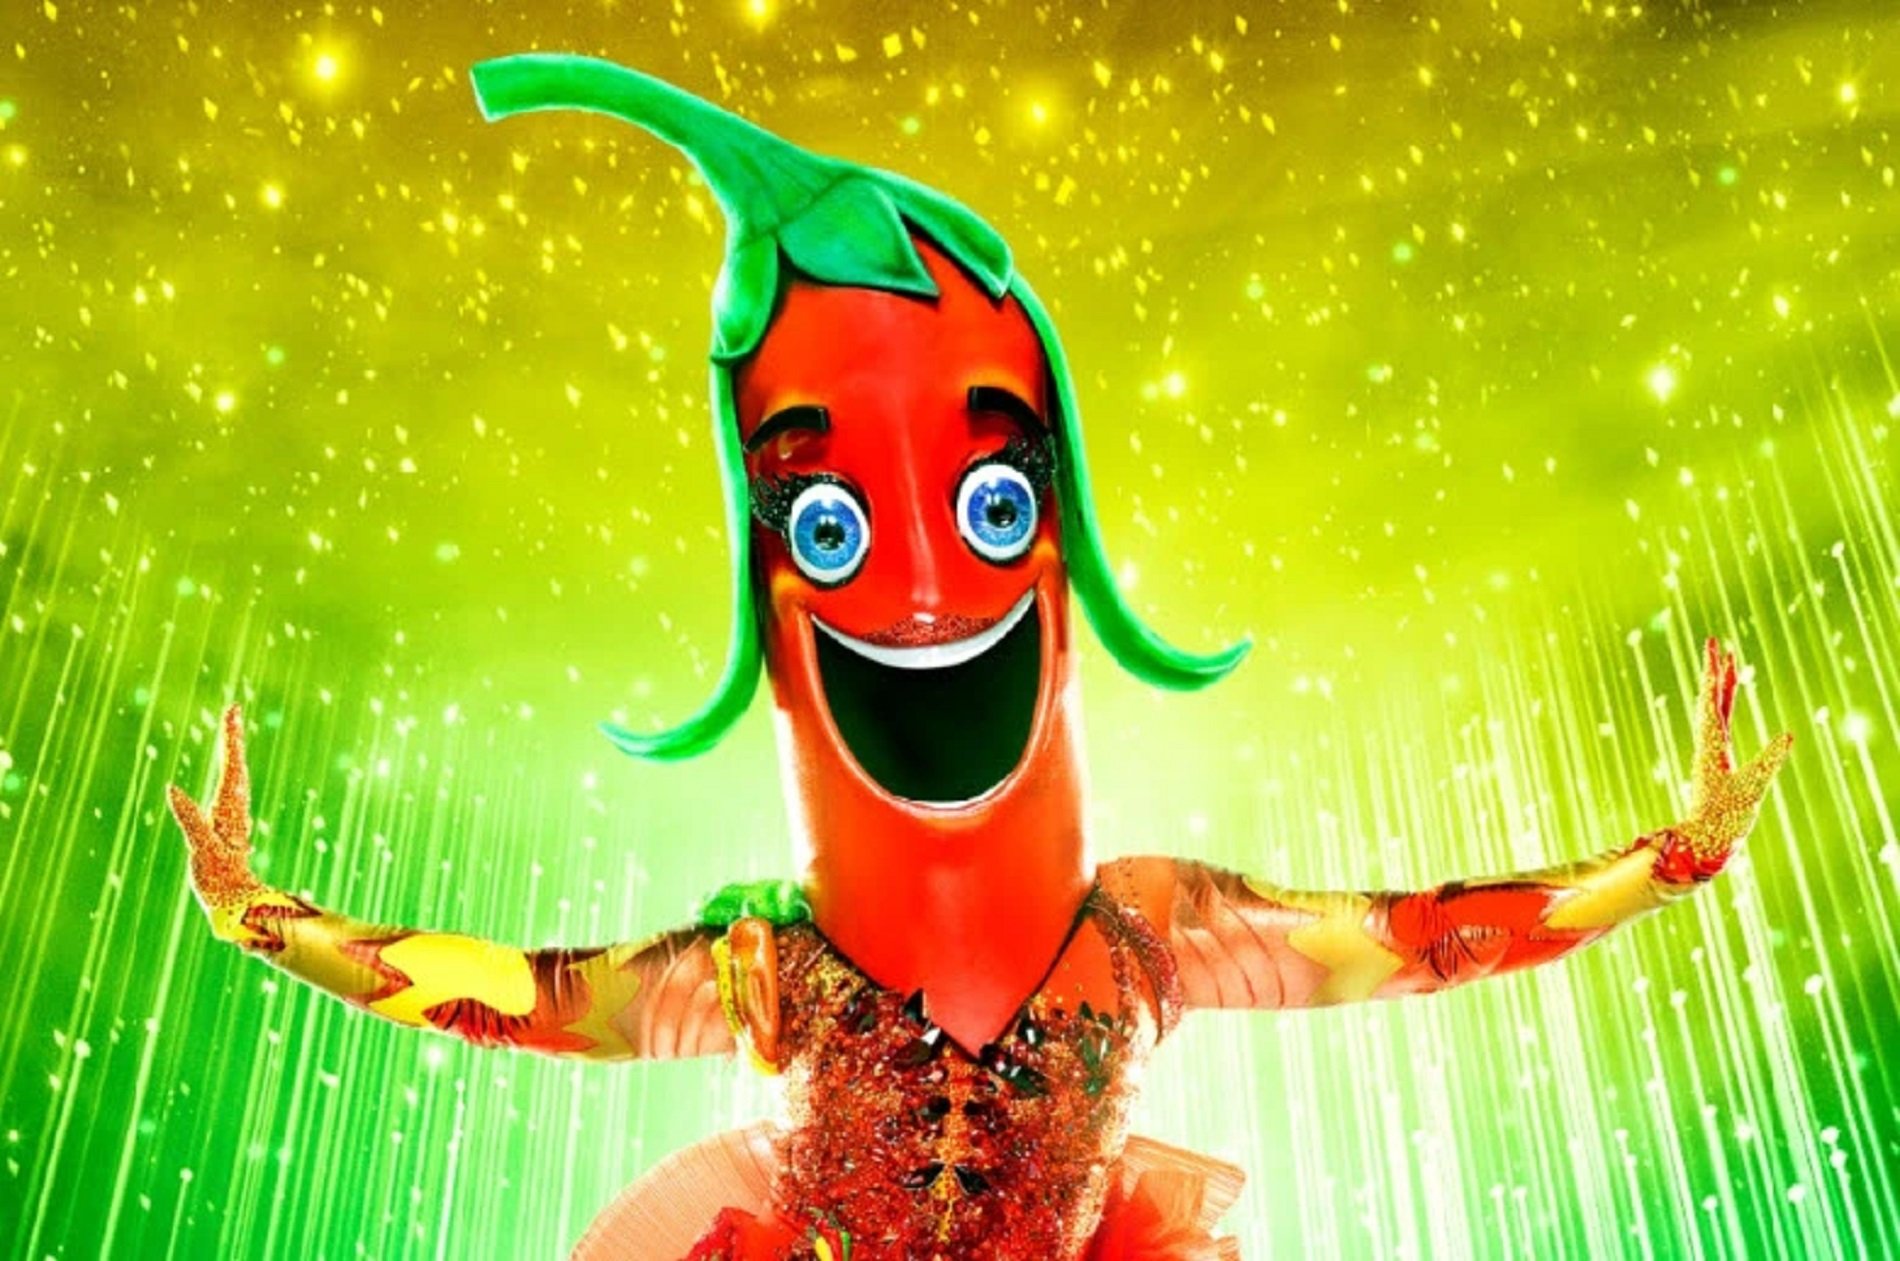 The Masked Singer costume of the Pepper